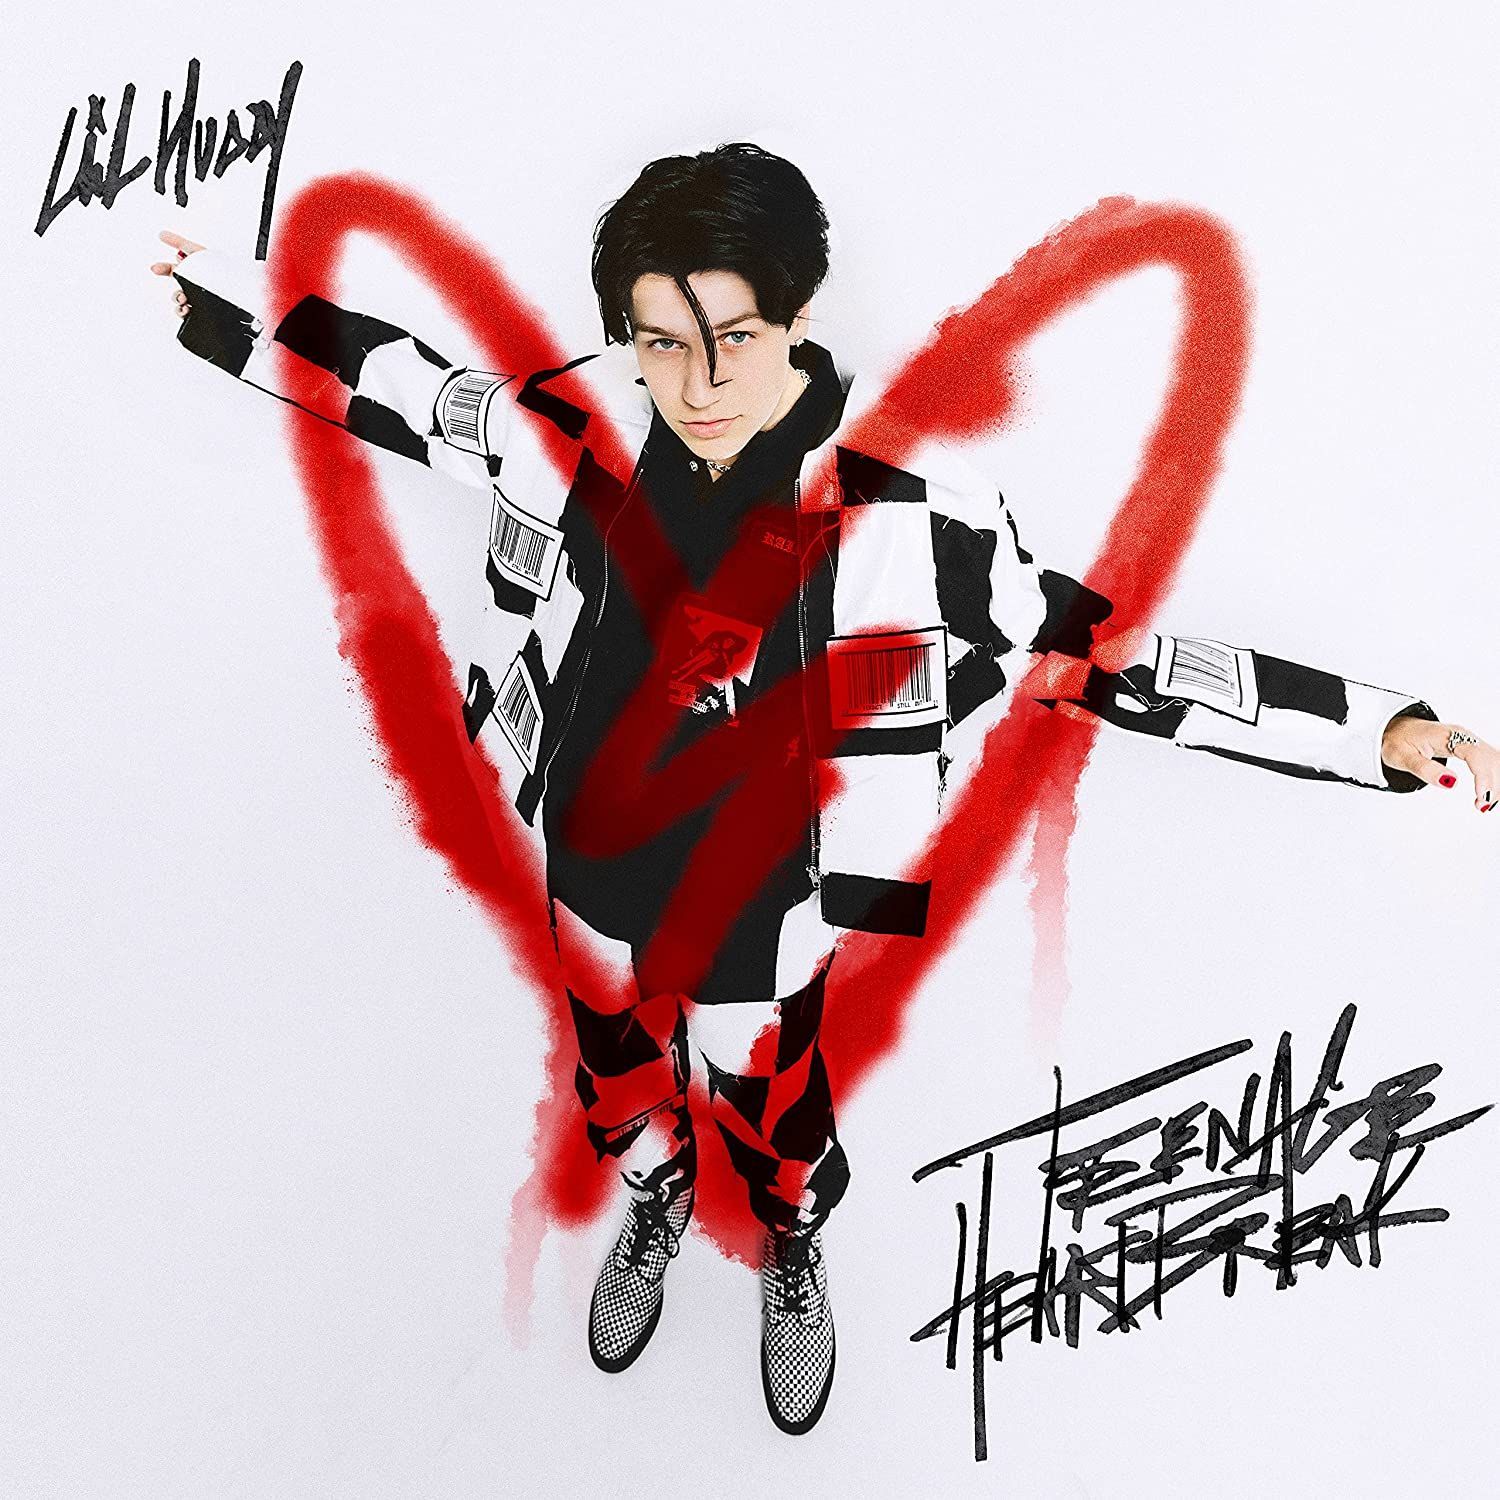 LILHUDDY’s "Teenage Heartbreak" is, unsurprisingly, uninspired and trite